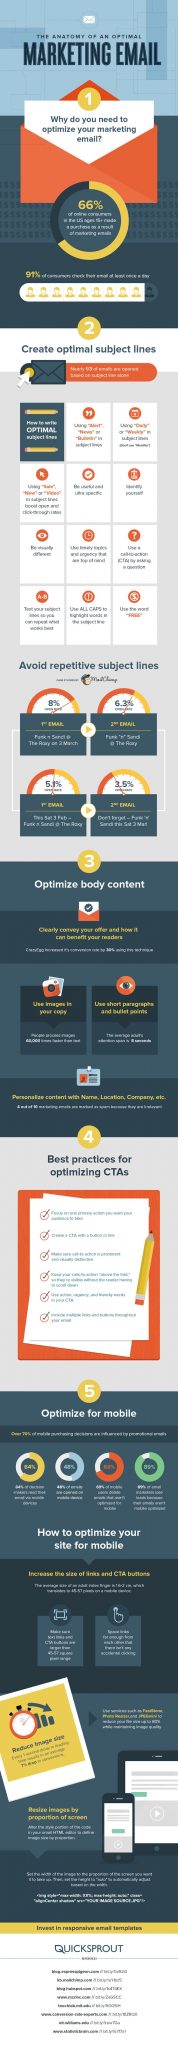 optimal-marketing-email-infographic